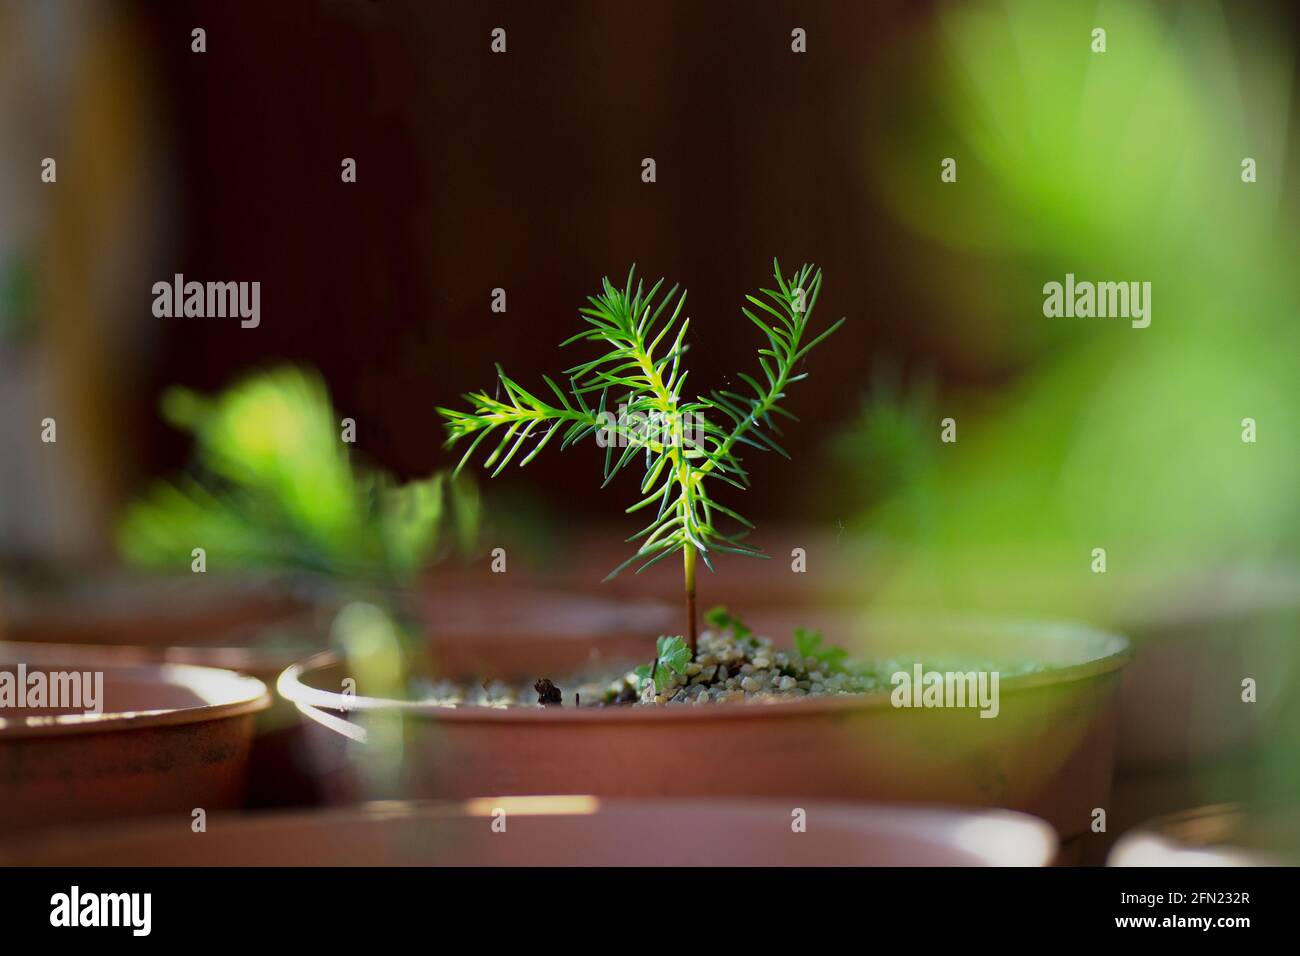 Young sequoia conifer in cultivation Stock Photo